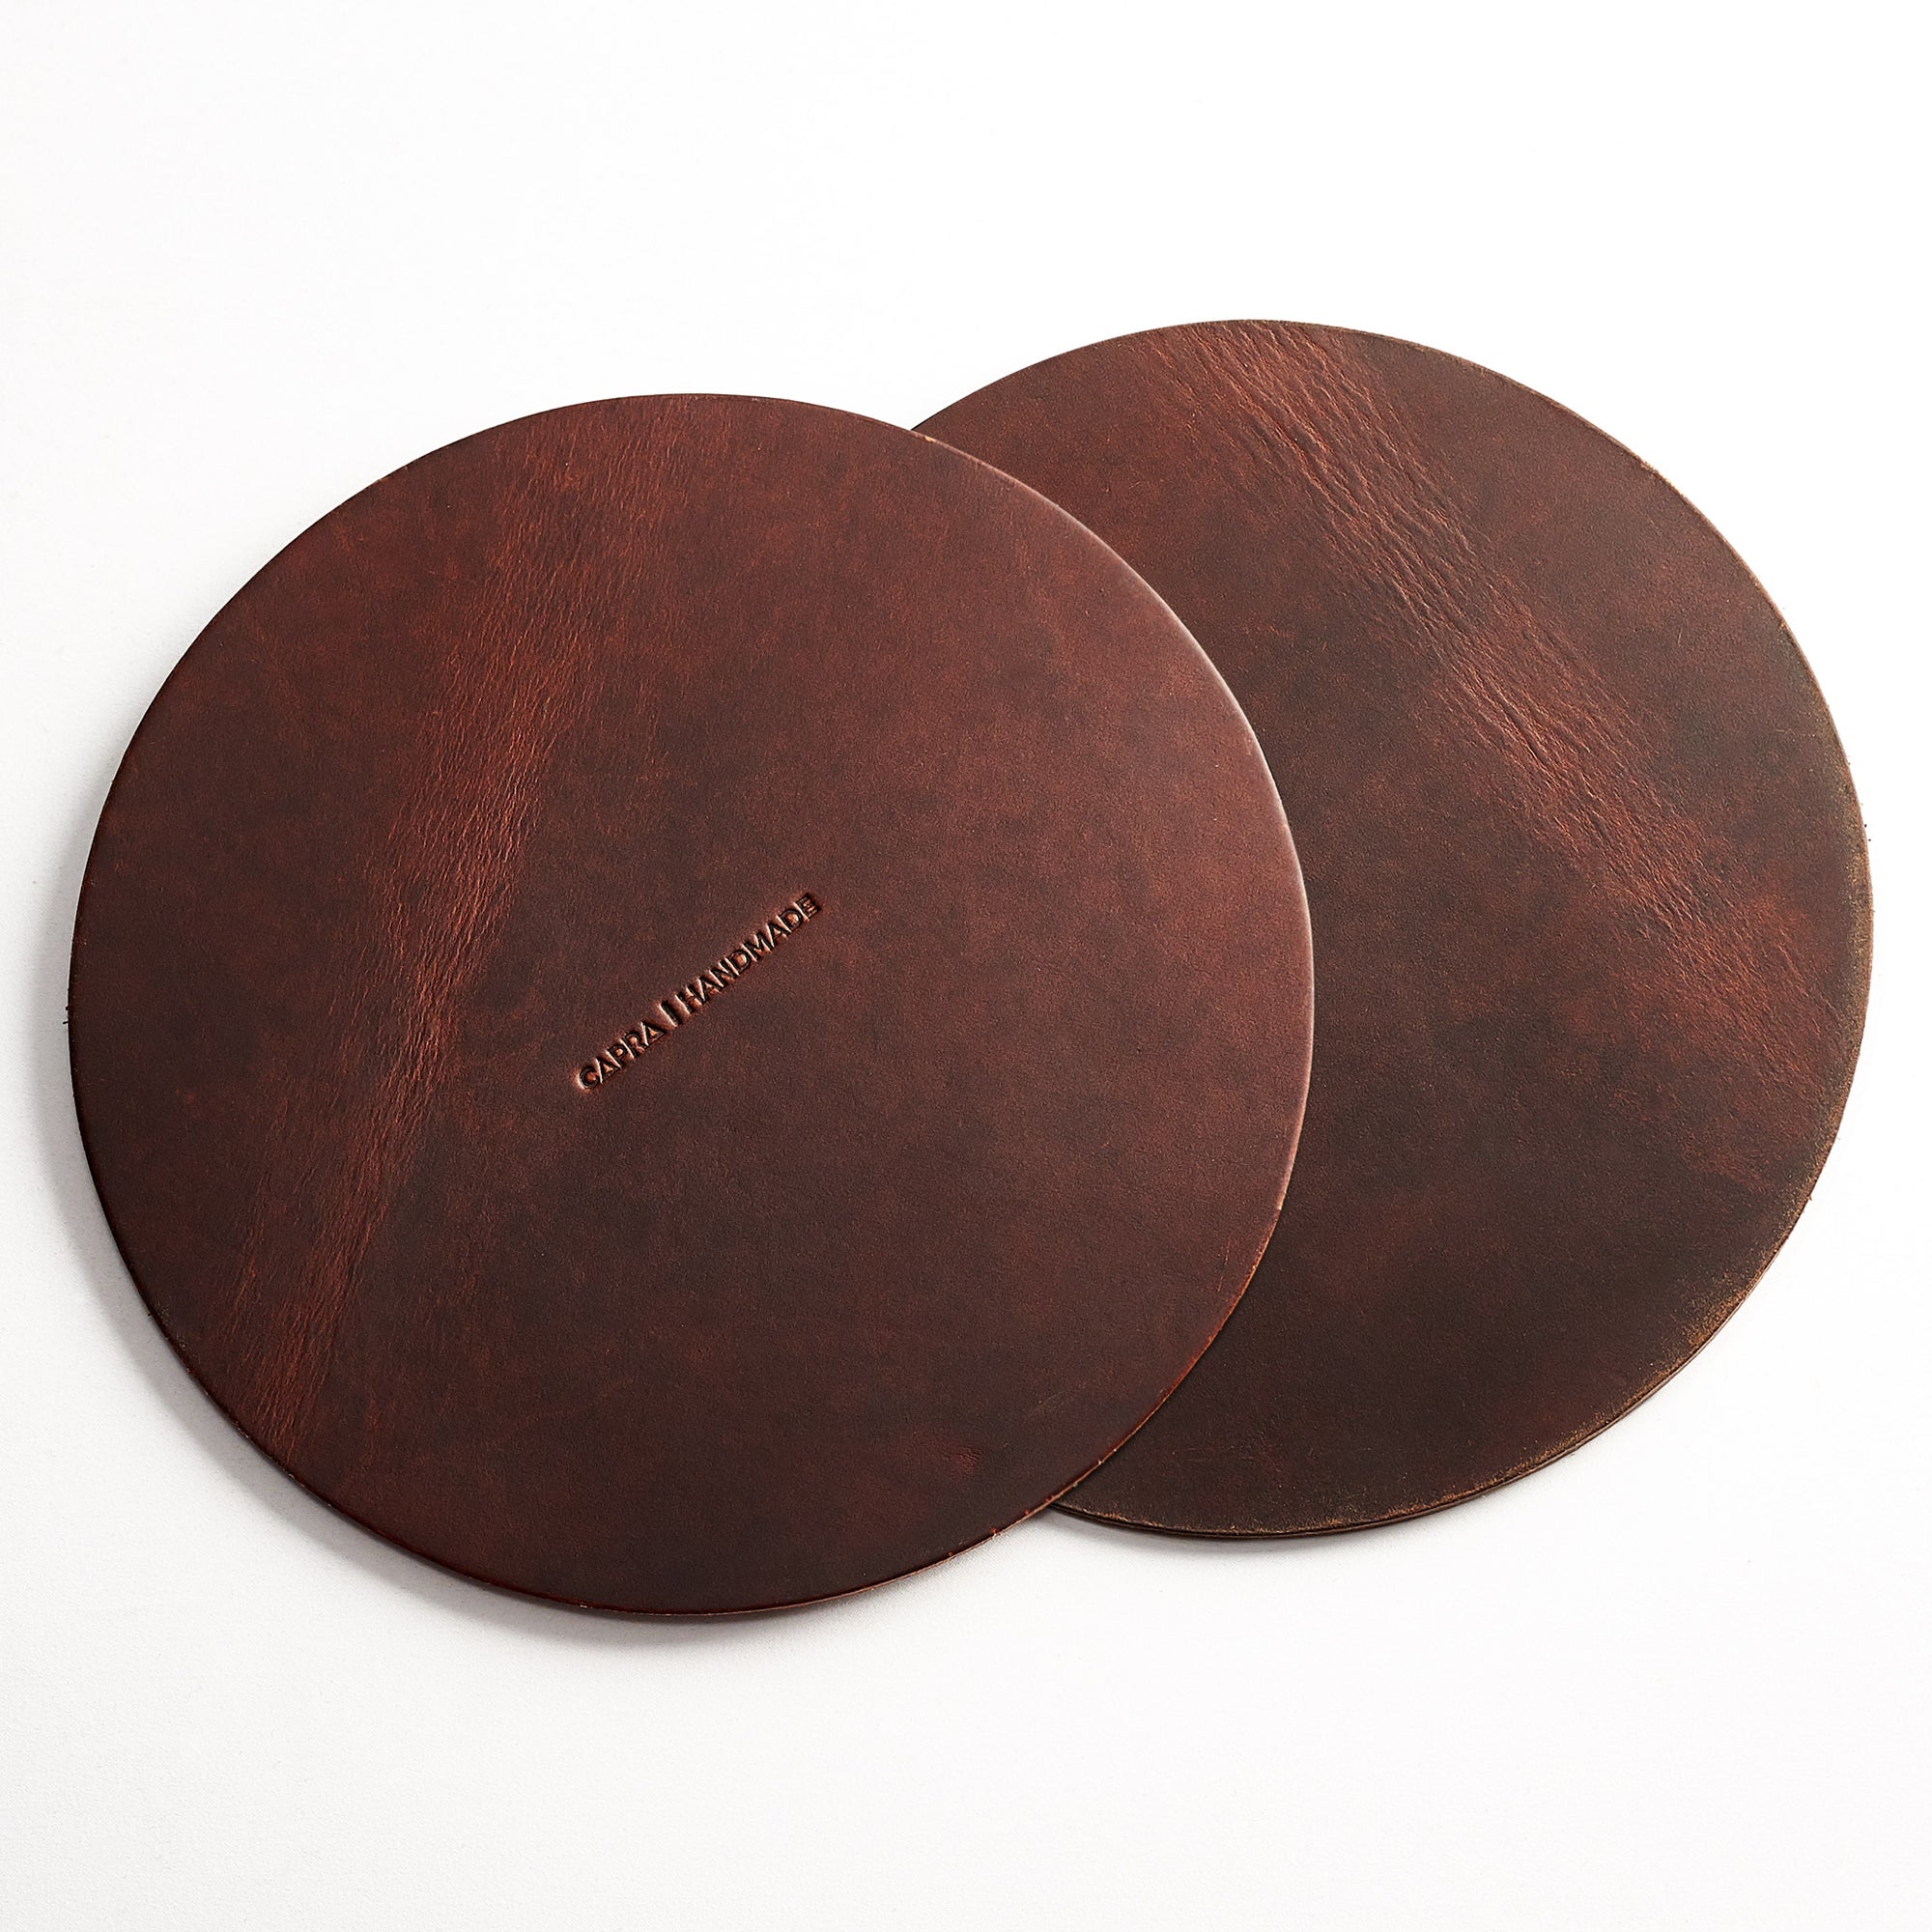 Dark Red Leather homepod pad, protect wood surfaces from white rings, mens cowhide coasters for apple smart speaker